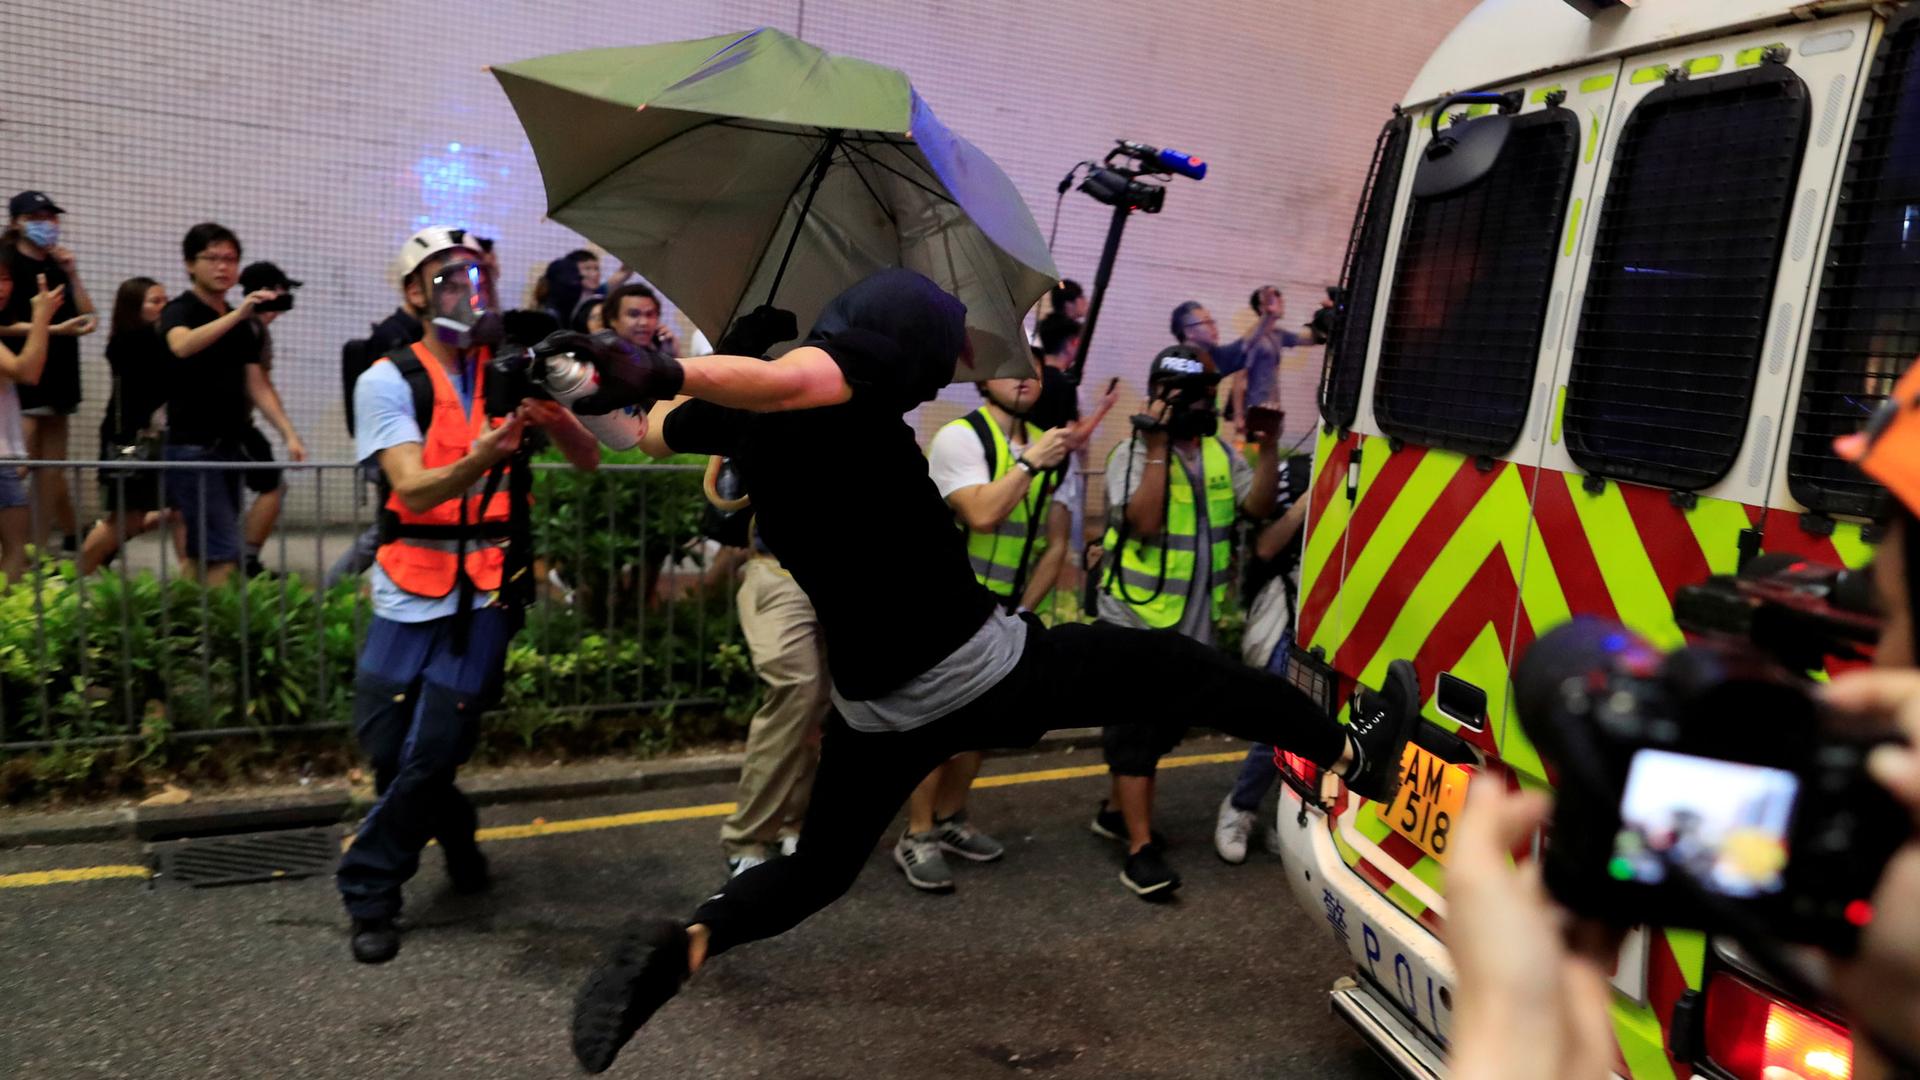 A protester is shown in mid-air kicking a police vehicle with their face fully covered in a mask.